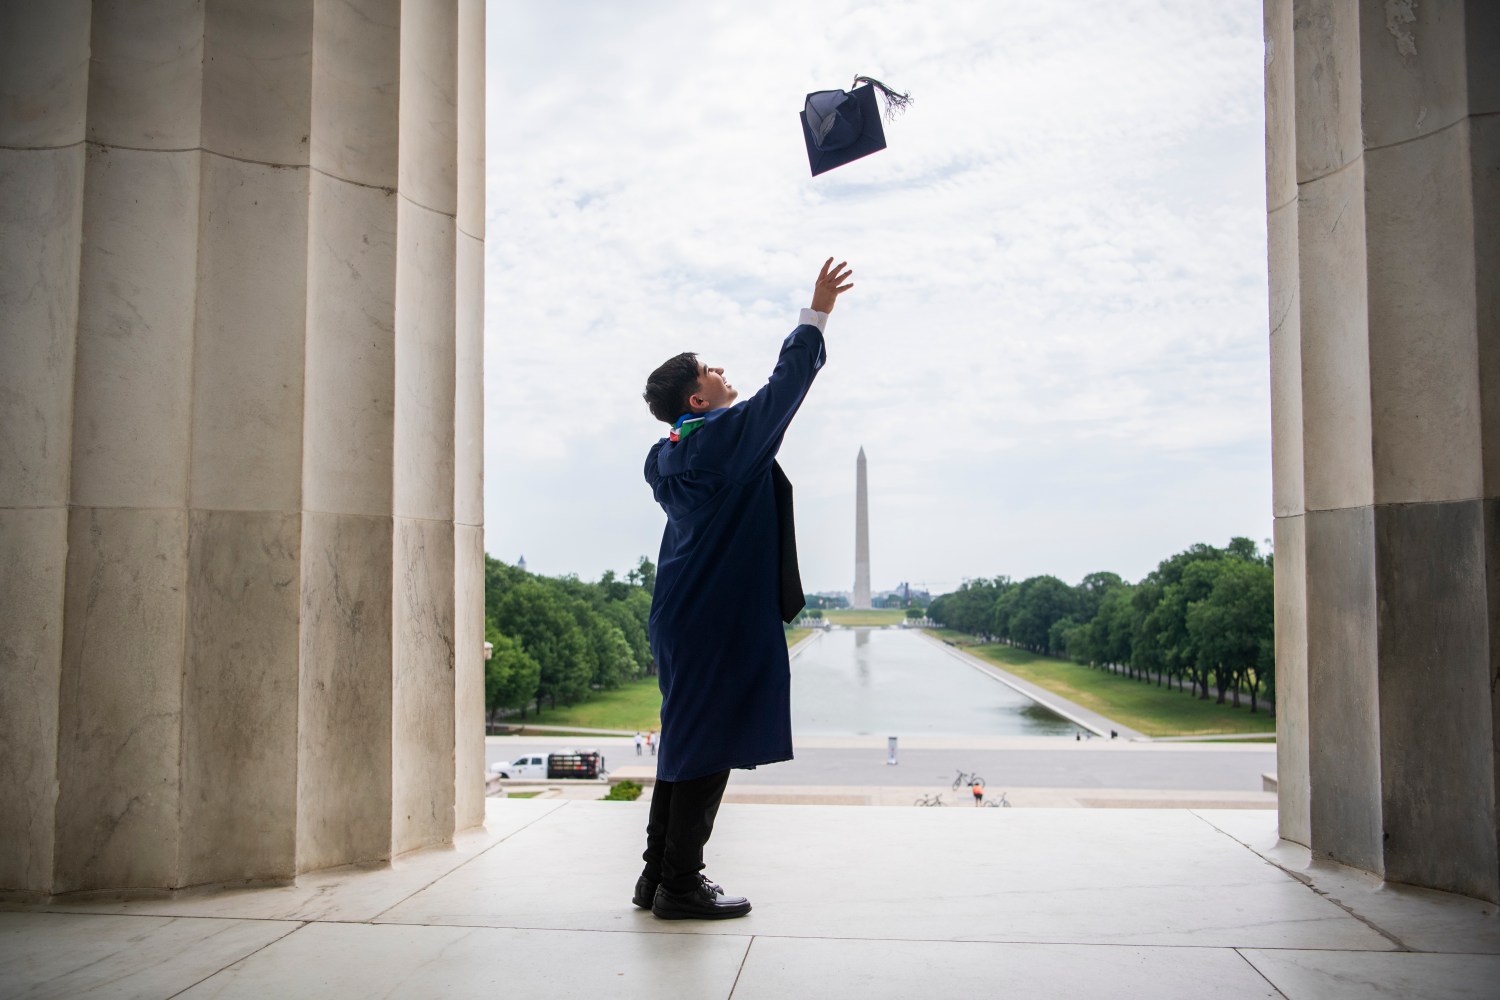 UNITED STATES - JUNE 03: Benjamin Leese, 17, a recent graduate from South County High School in Lorton, VA, tosses his cap at the Lincoln Memorial on Wednesday, June 3, 2020. (Photo By Tom Williams/CQ Roll Call/Sipa USA)No Use UK. No Use Germany.